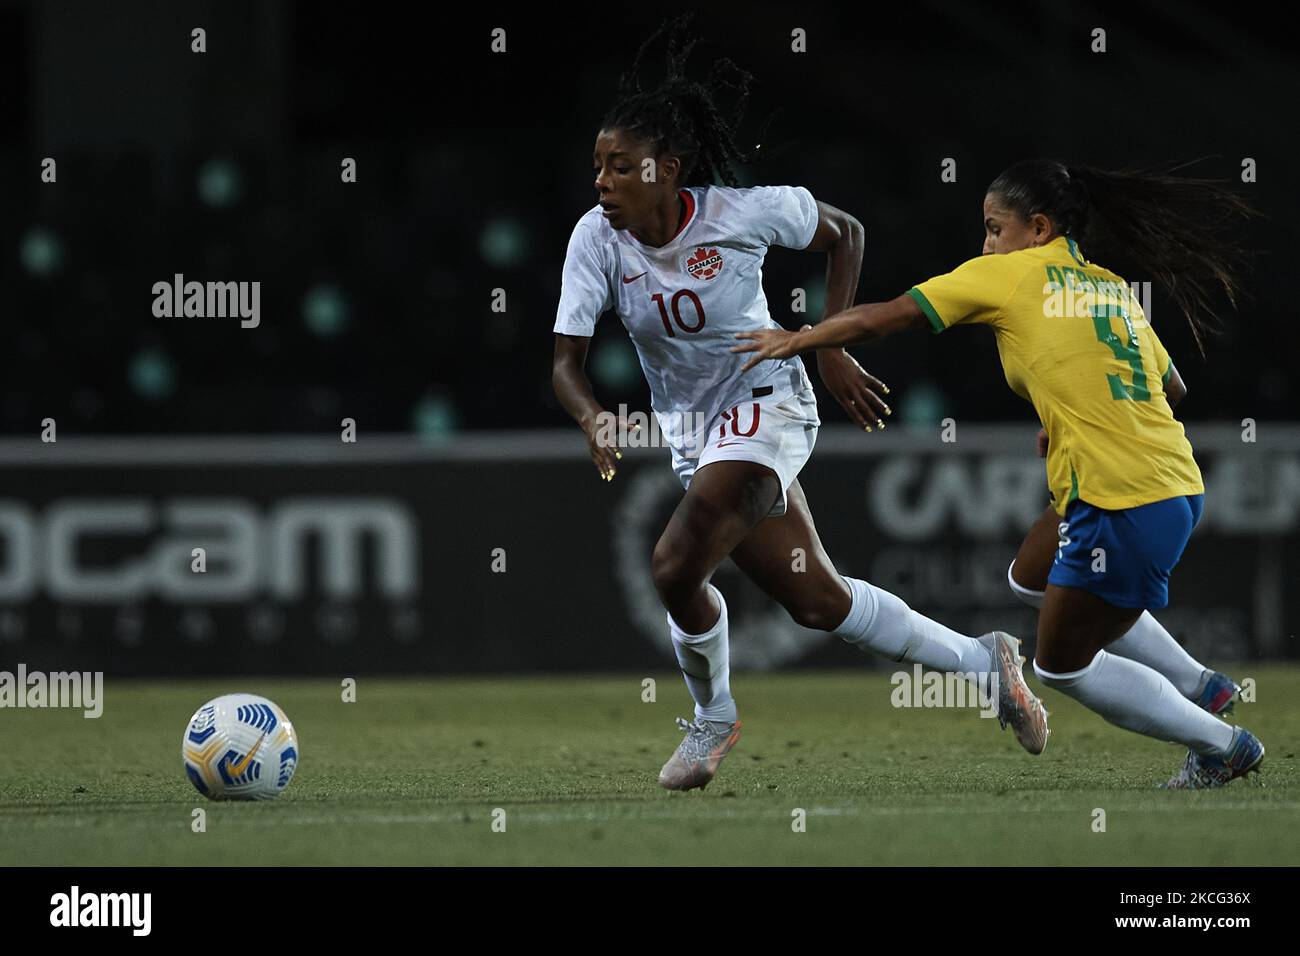 Ashley Lawrence of Canada and Angelina Costantino of Brazil competes for the ball during the Women's International Friendly match between Brazil and Canada at Estadio Cartagonova on June 14, 2021 in Cartagena, (Photo by Jose Breton/Pics Action/NurPhoto) Stock Photo